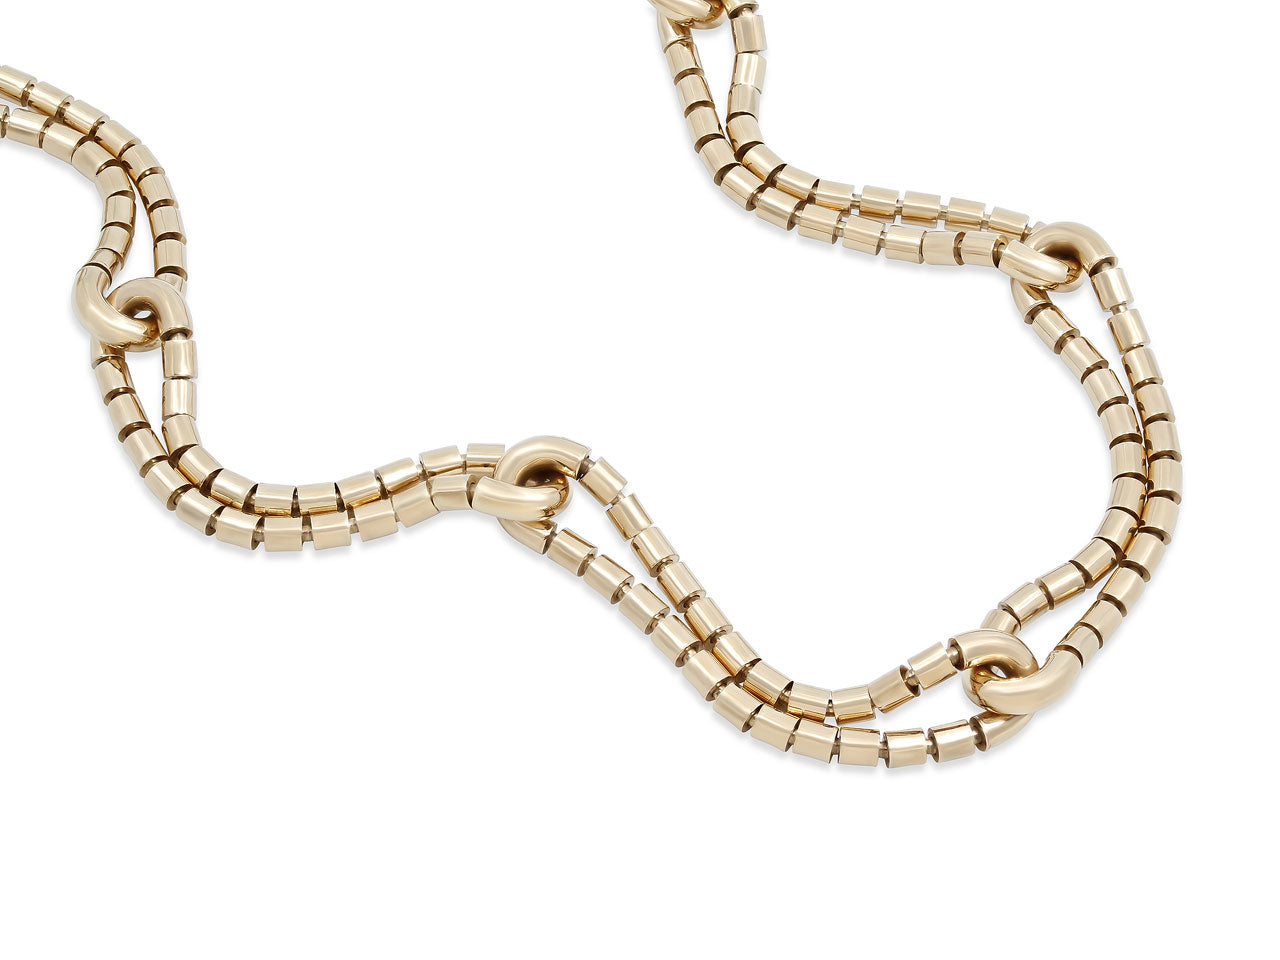 Italian Gold Flexible Link Chain Necklace in 18K Gold, by Beladora